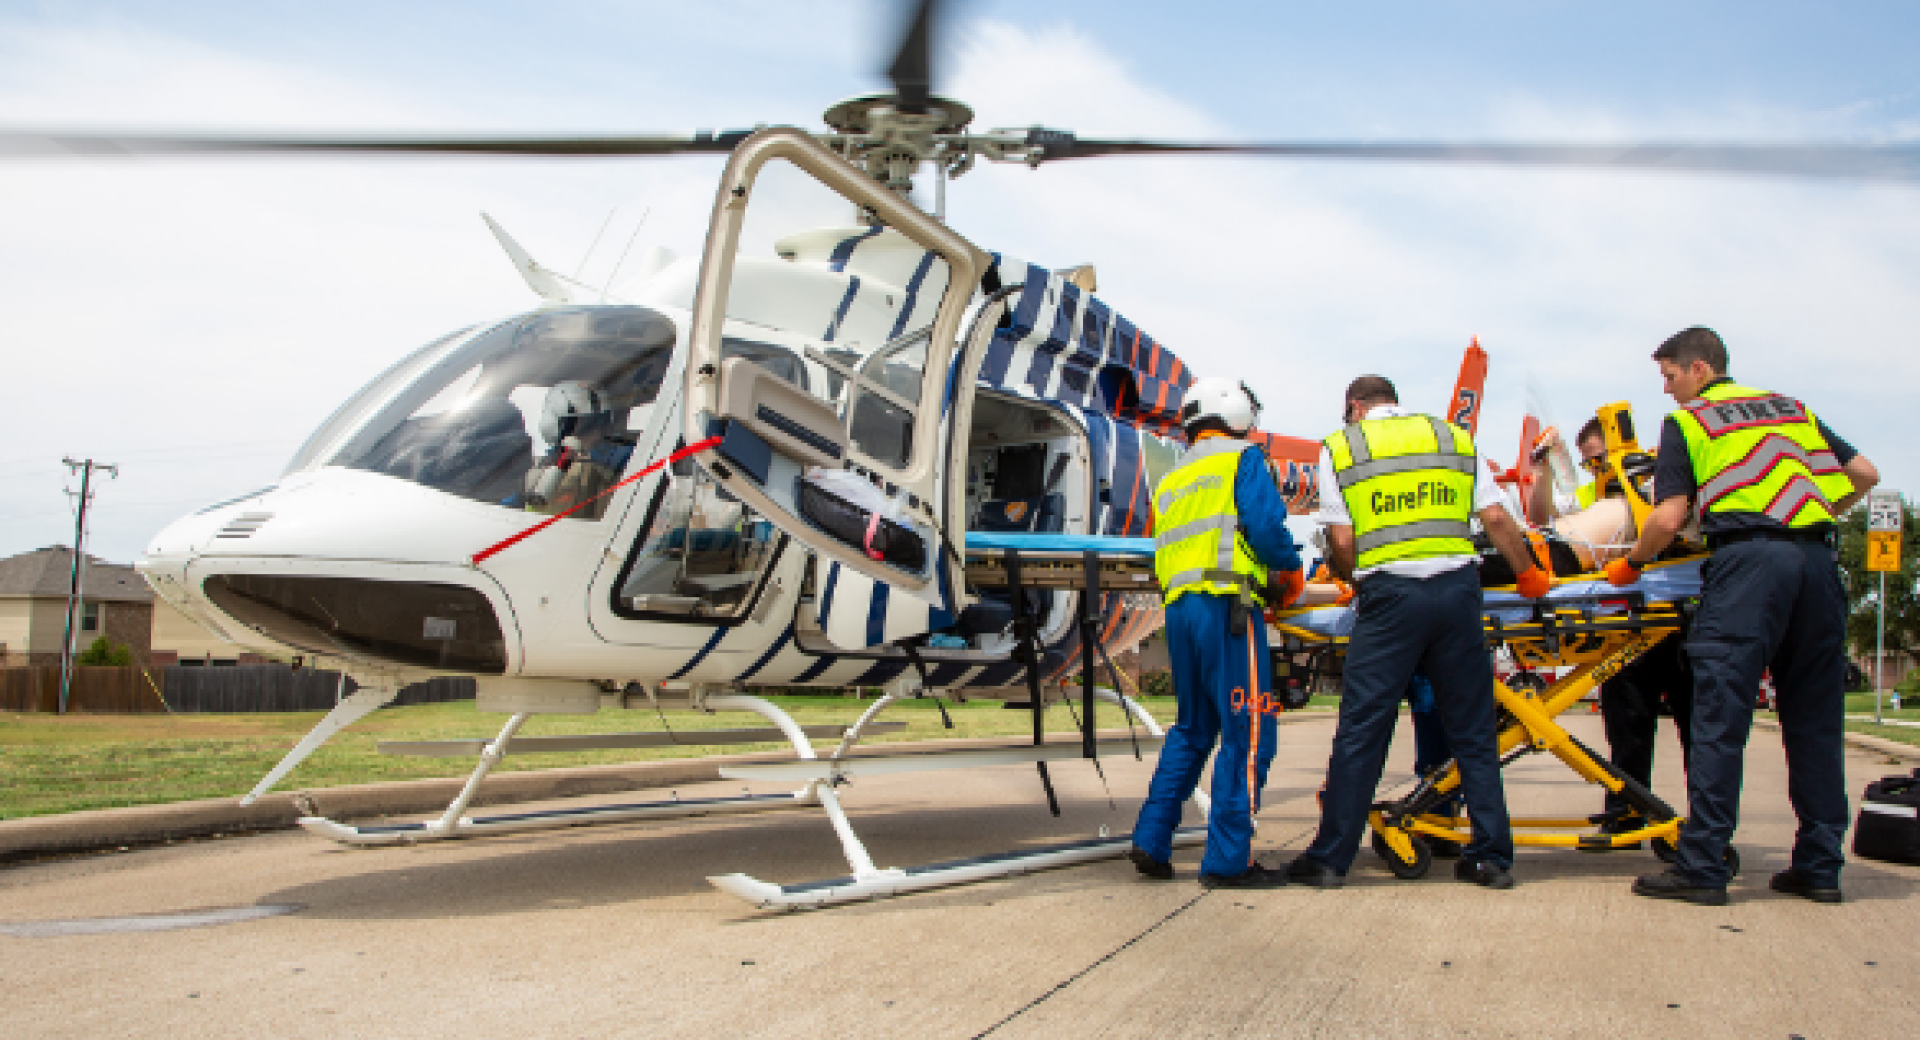 CareFlite first in DFW to carry whole blood on air ambulances